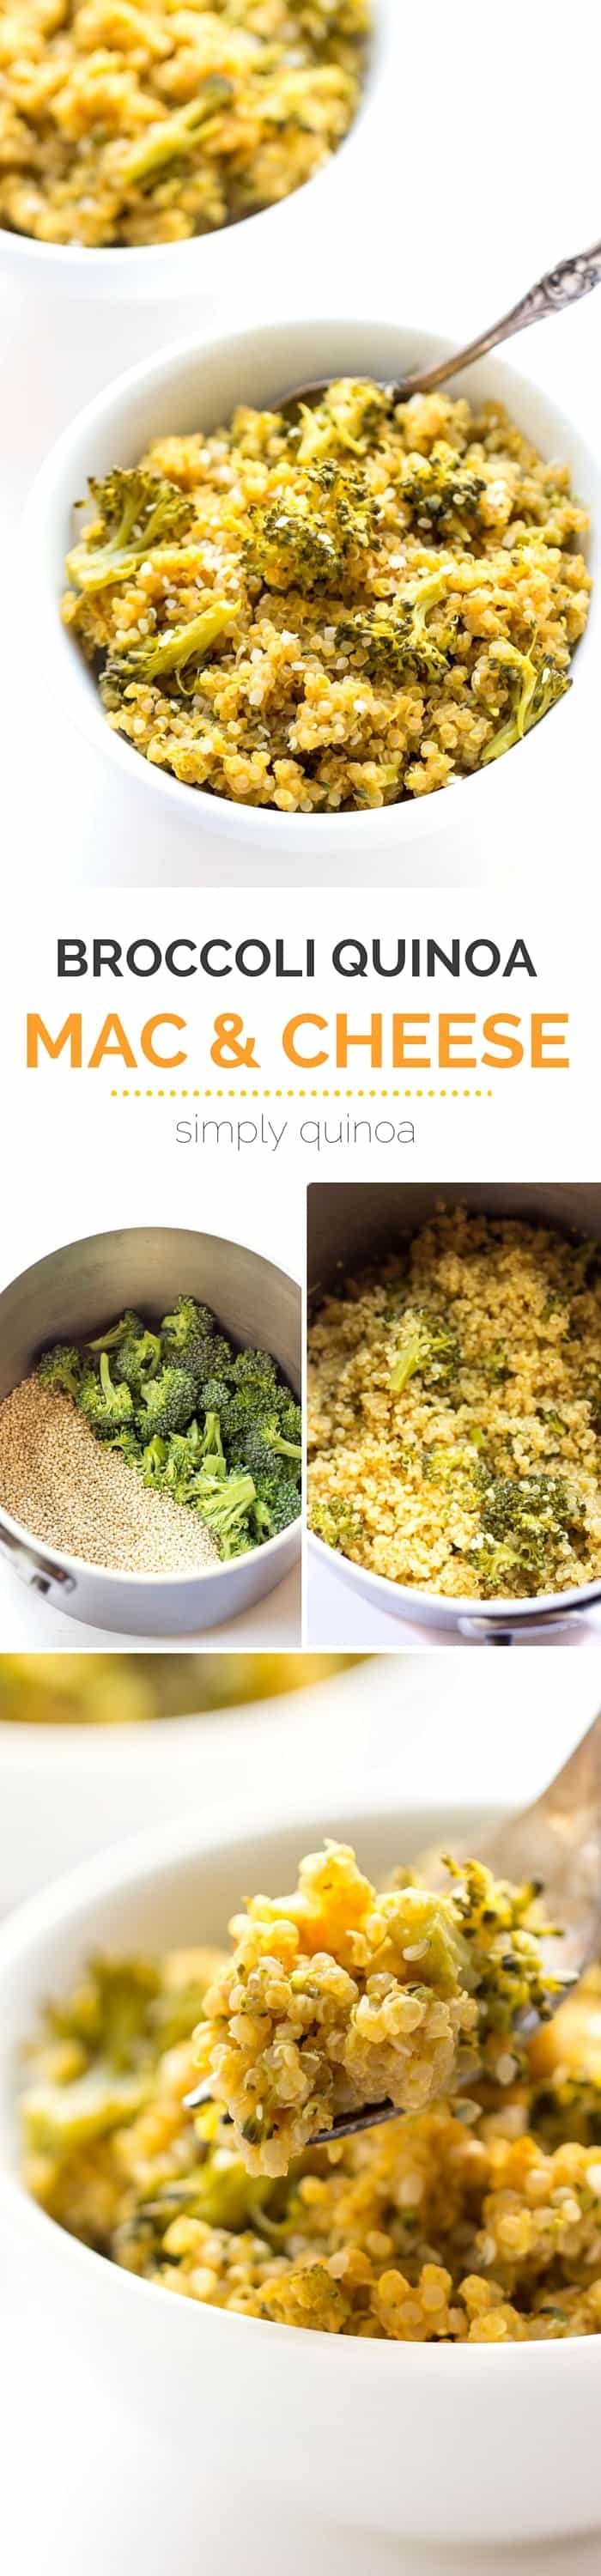 QUINOA MAC AND CHEESE with broccoli -- the perfect meal when you think you have no time to cook. Takes just one pot, takes less than 20 minutes AND it only uses 5 ingredients! [gluten-free + vegan]